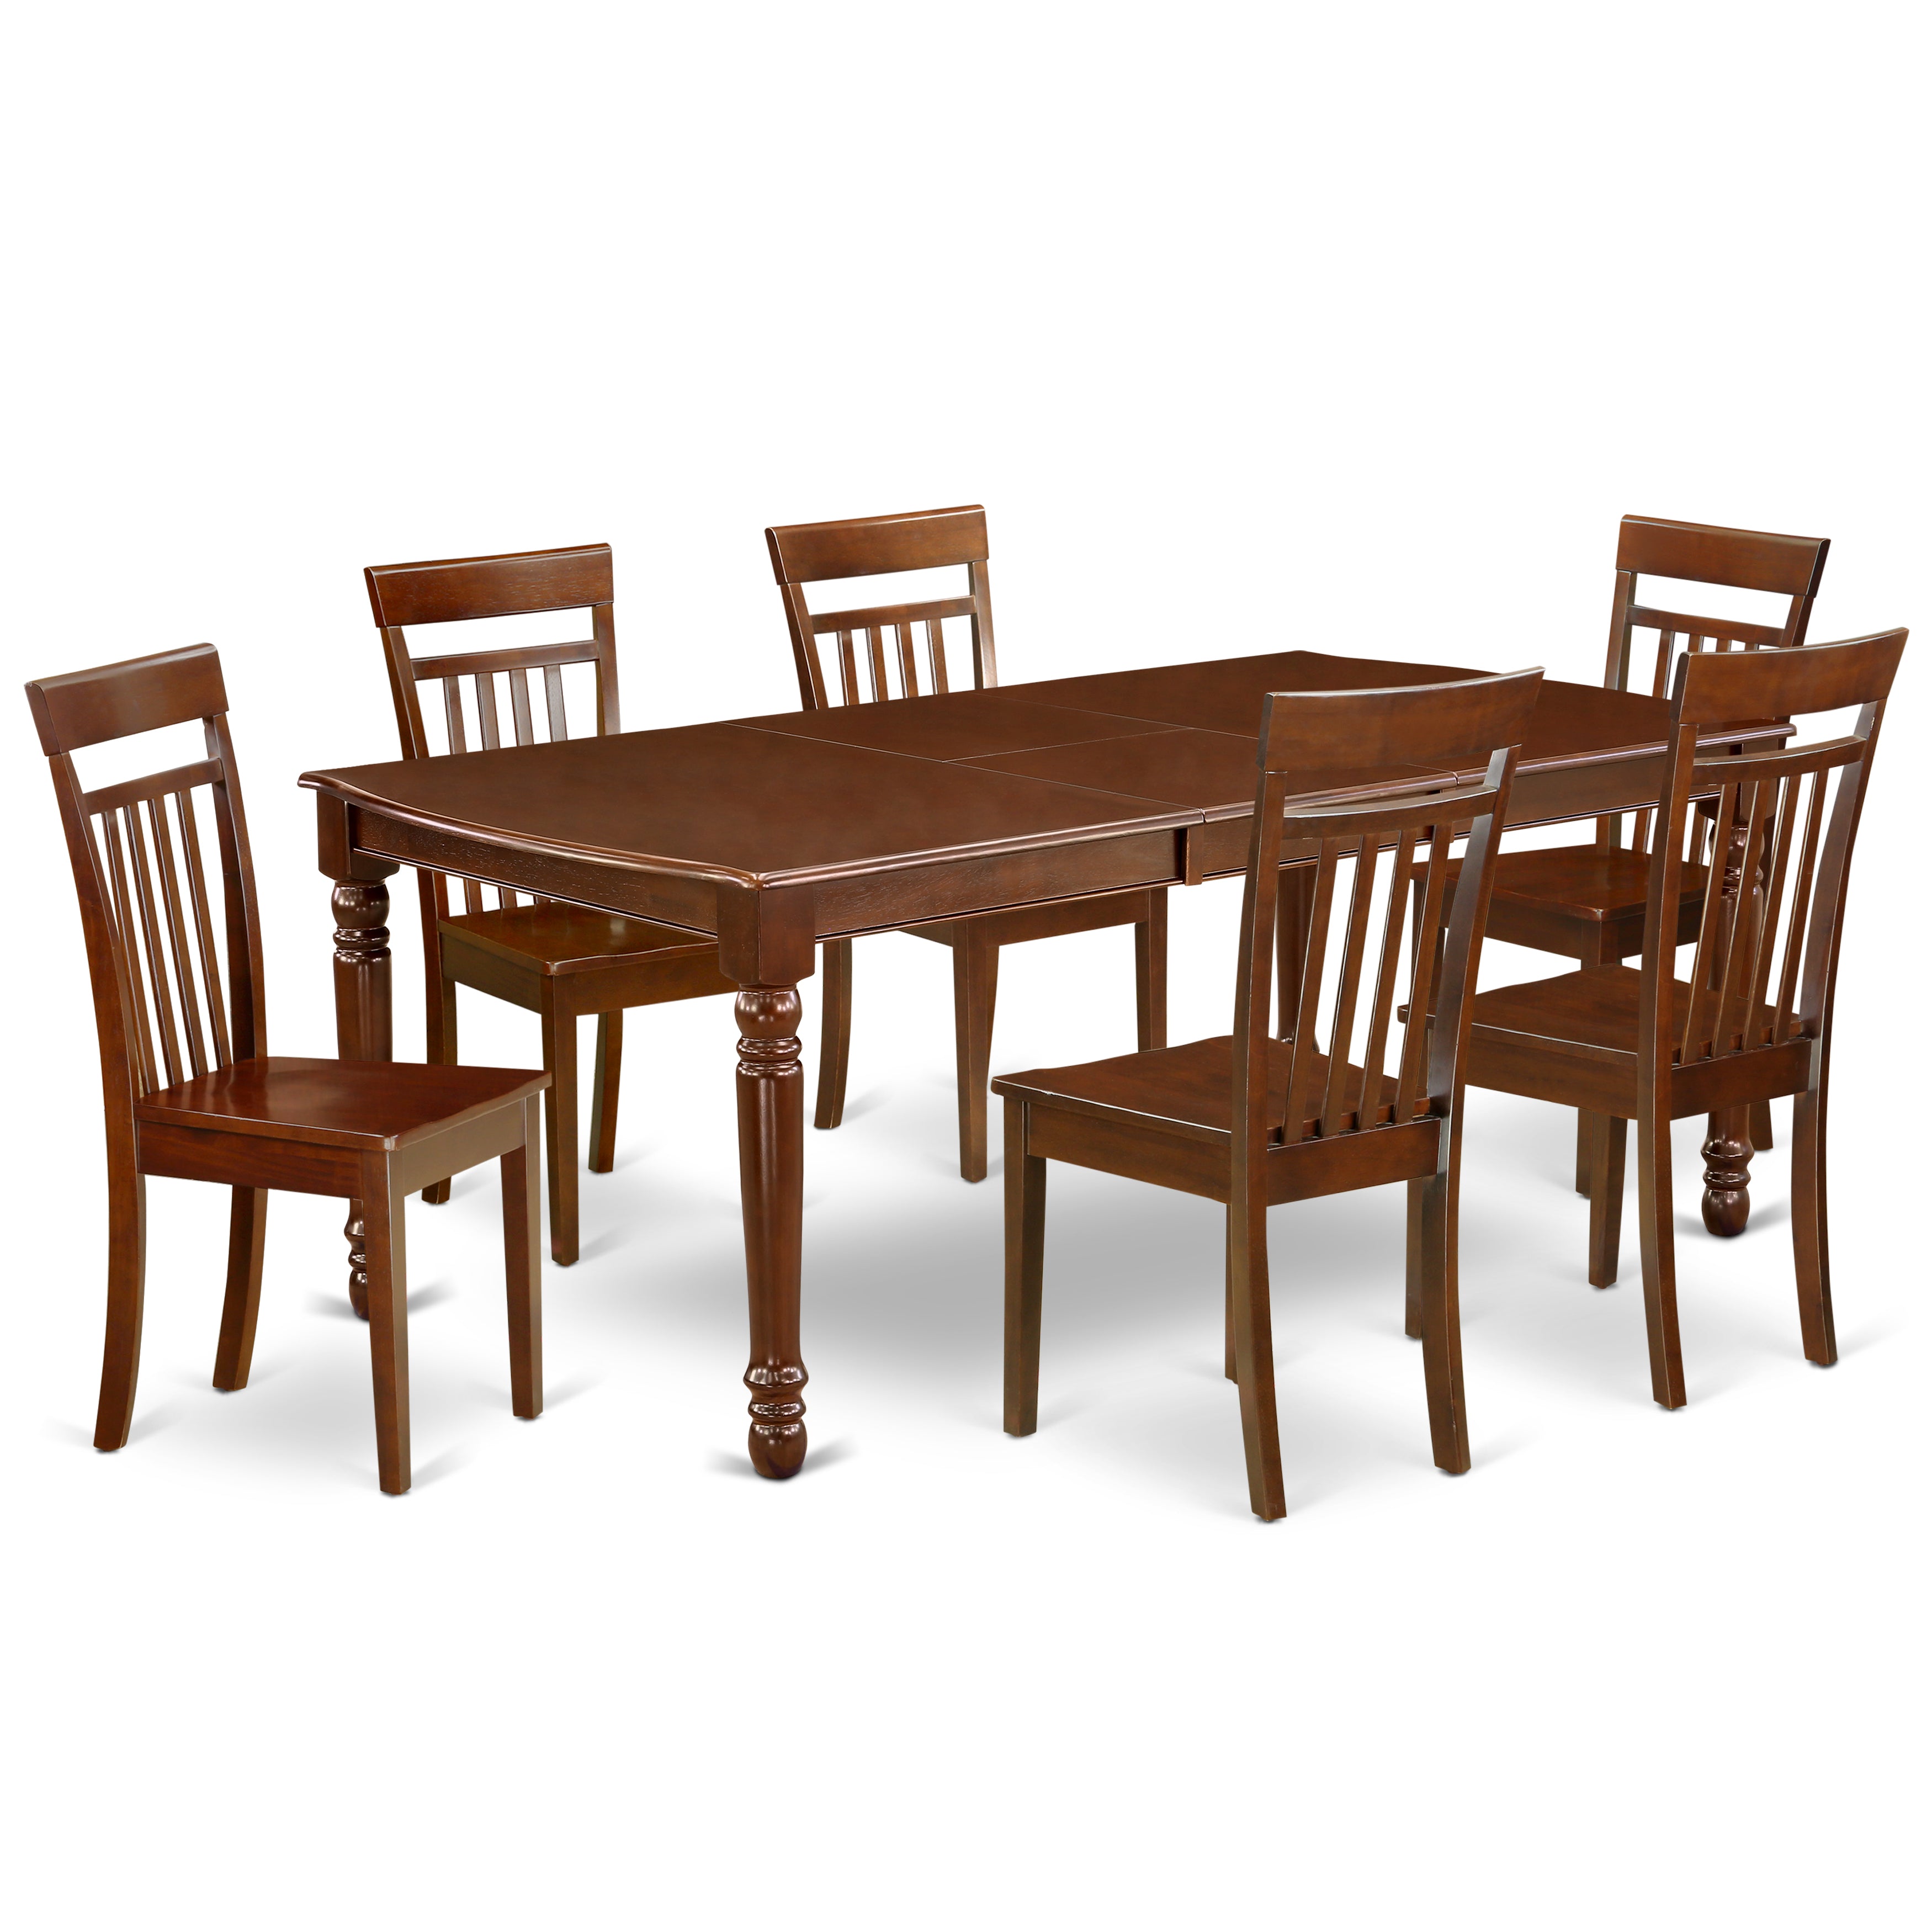 DOCA7-MAH-W 7Pc Rectangle 60/78" Dining Room Table With 18 In Self Storing Butterfly Leaf And 6 Wood Seat Chairs